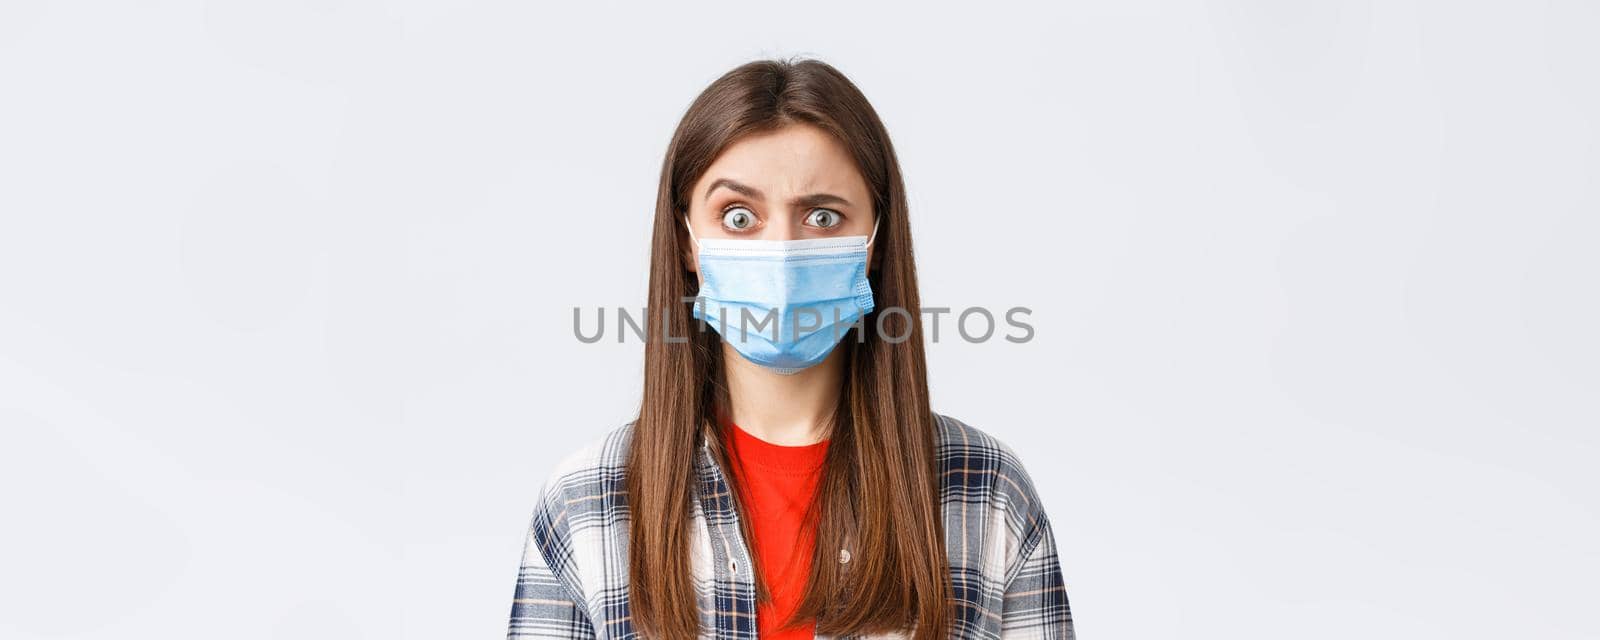 Coronavirus outbreak, leisure on quarantine, social distancing and emotions concept. Confused and startled girl in medical mask seeing something strange, raise eyebrow skeptical by Benzoix